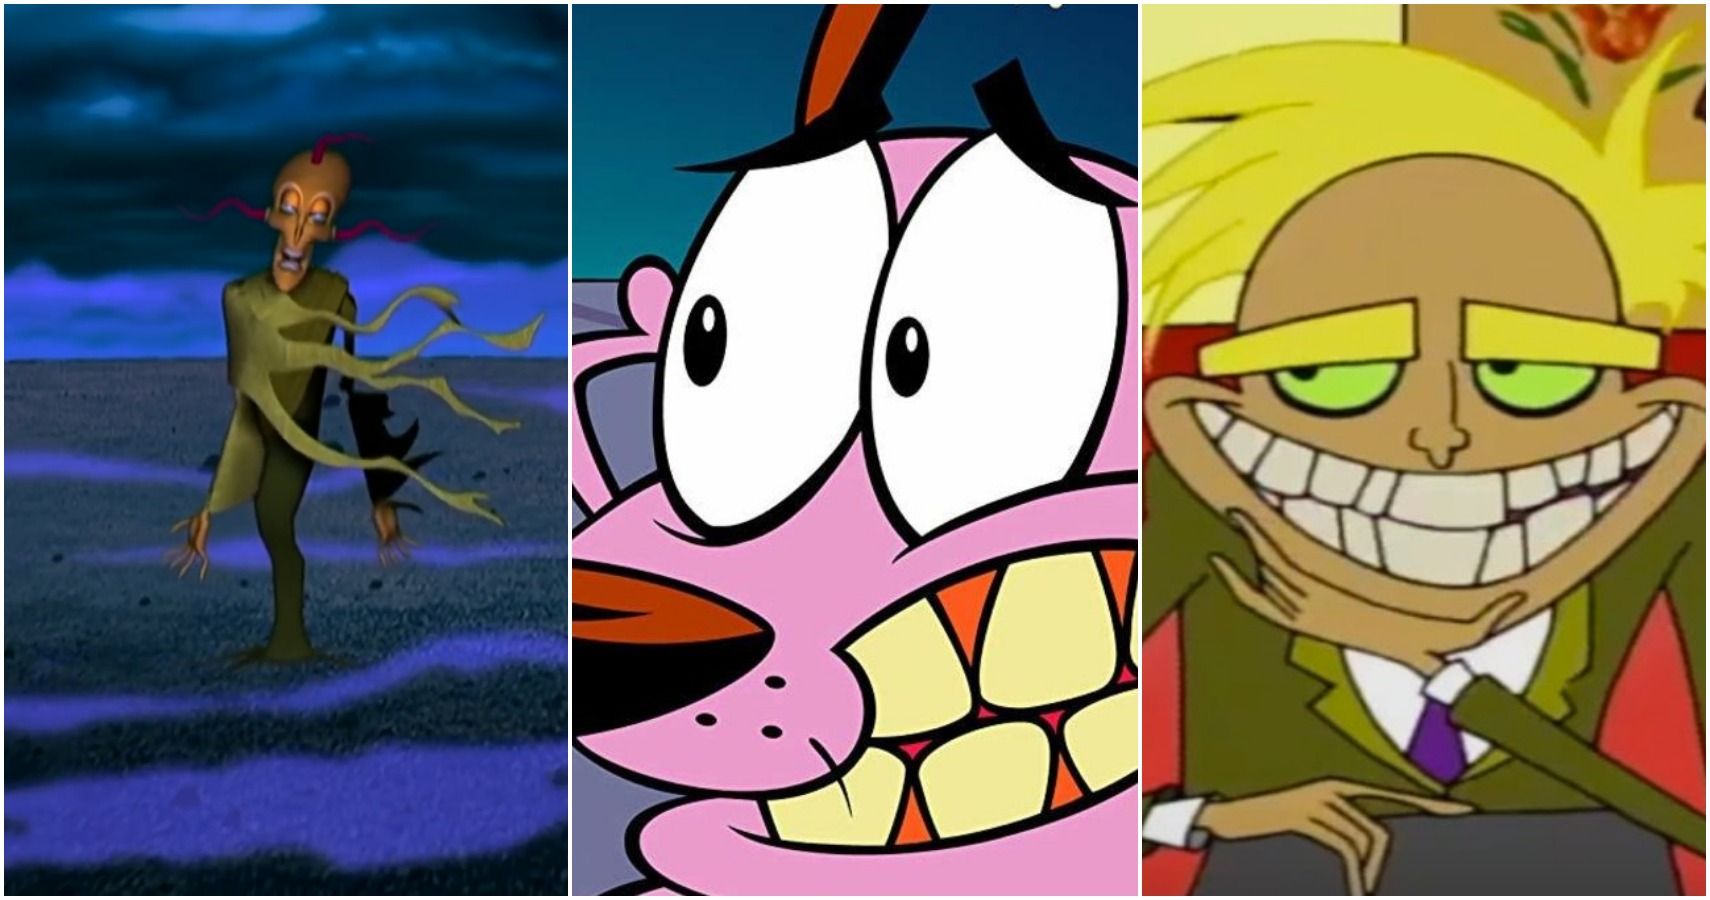 The 10 Best Episodes Of Courage The Cowardly Dog (According To IMDb)